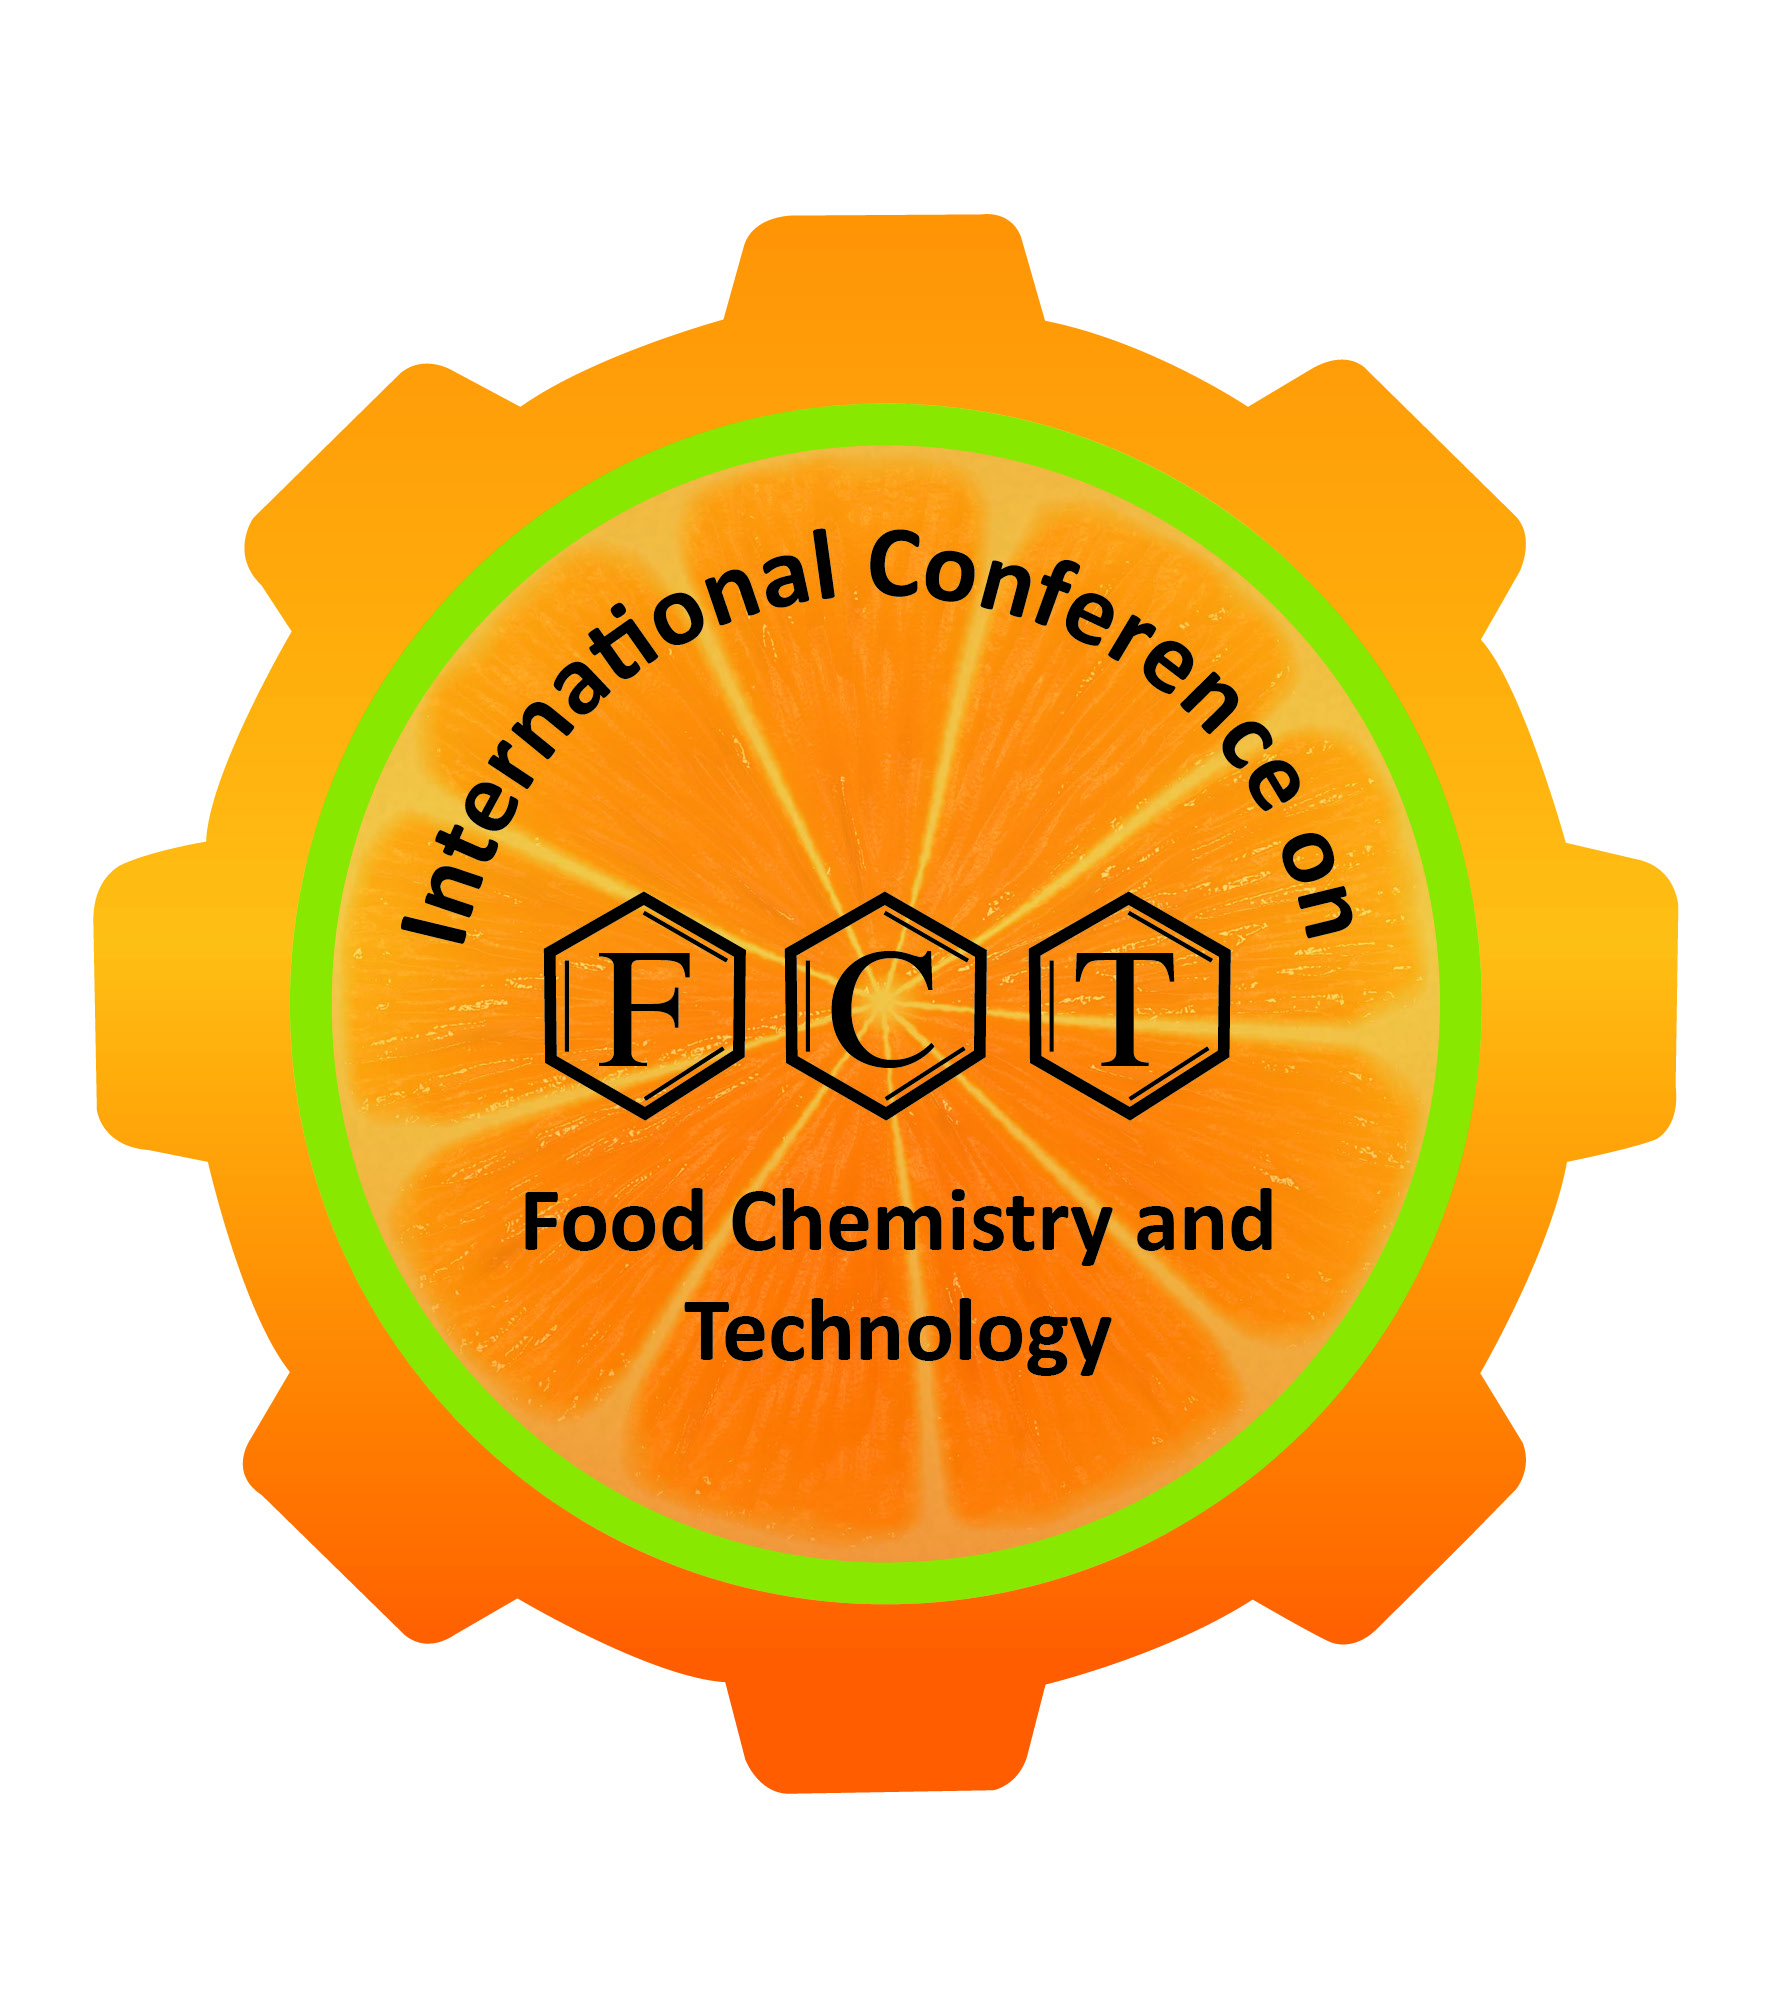 FCT-2017 will be a valuable and important platform for inspiring international and interdisciplinary exchange at the forefront of food research. 